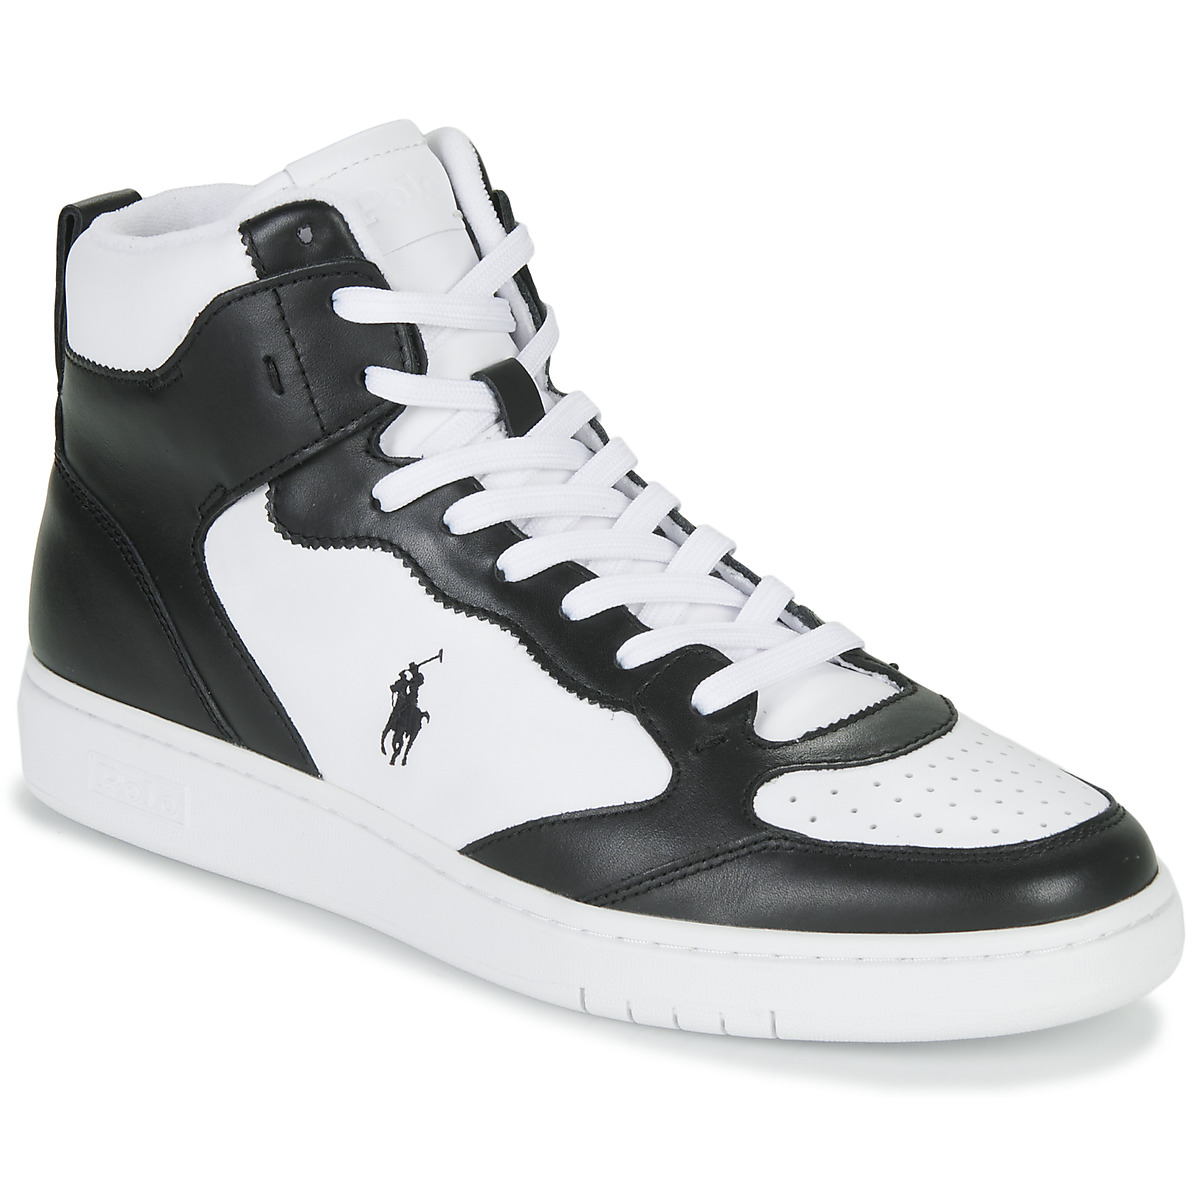 Polo Ralph Lauren Polo Crt Hgh-sneakers-low Top Lace Black